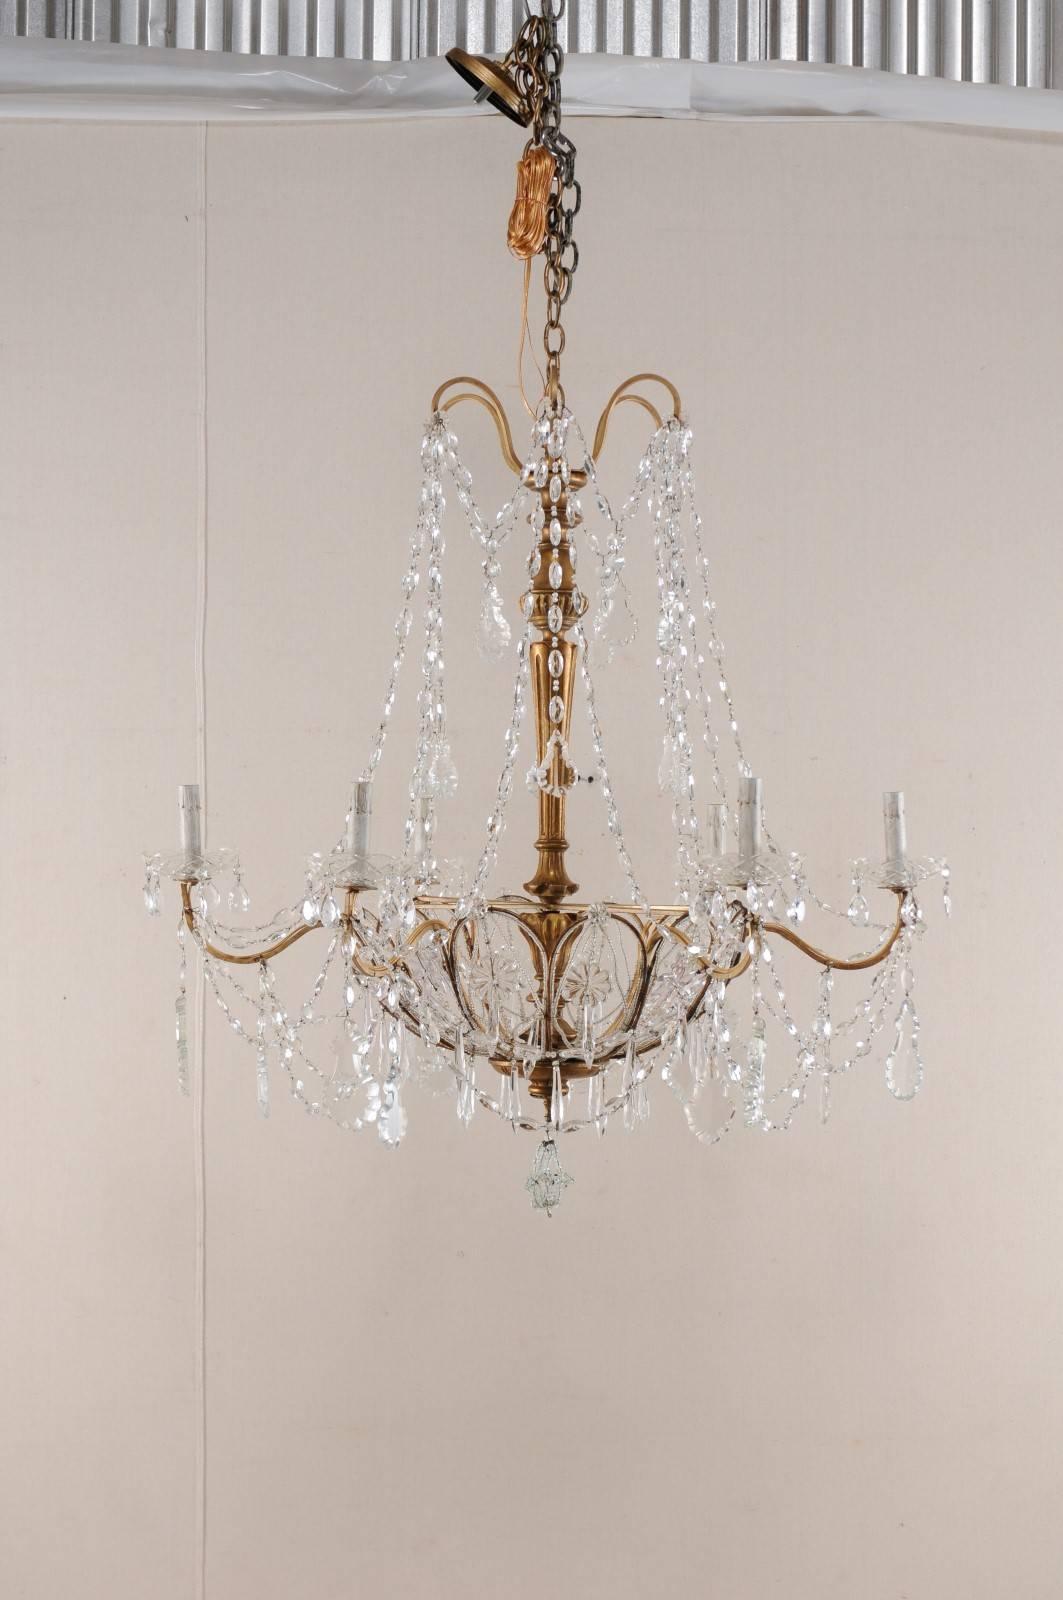 A vintage Italian crystal chandelier with carved wood central column. This Italian chandelier features a beautifully carved and gilded central column adorn with a display of crystals and Italian glass beaded swags splaying down from it's top,